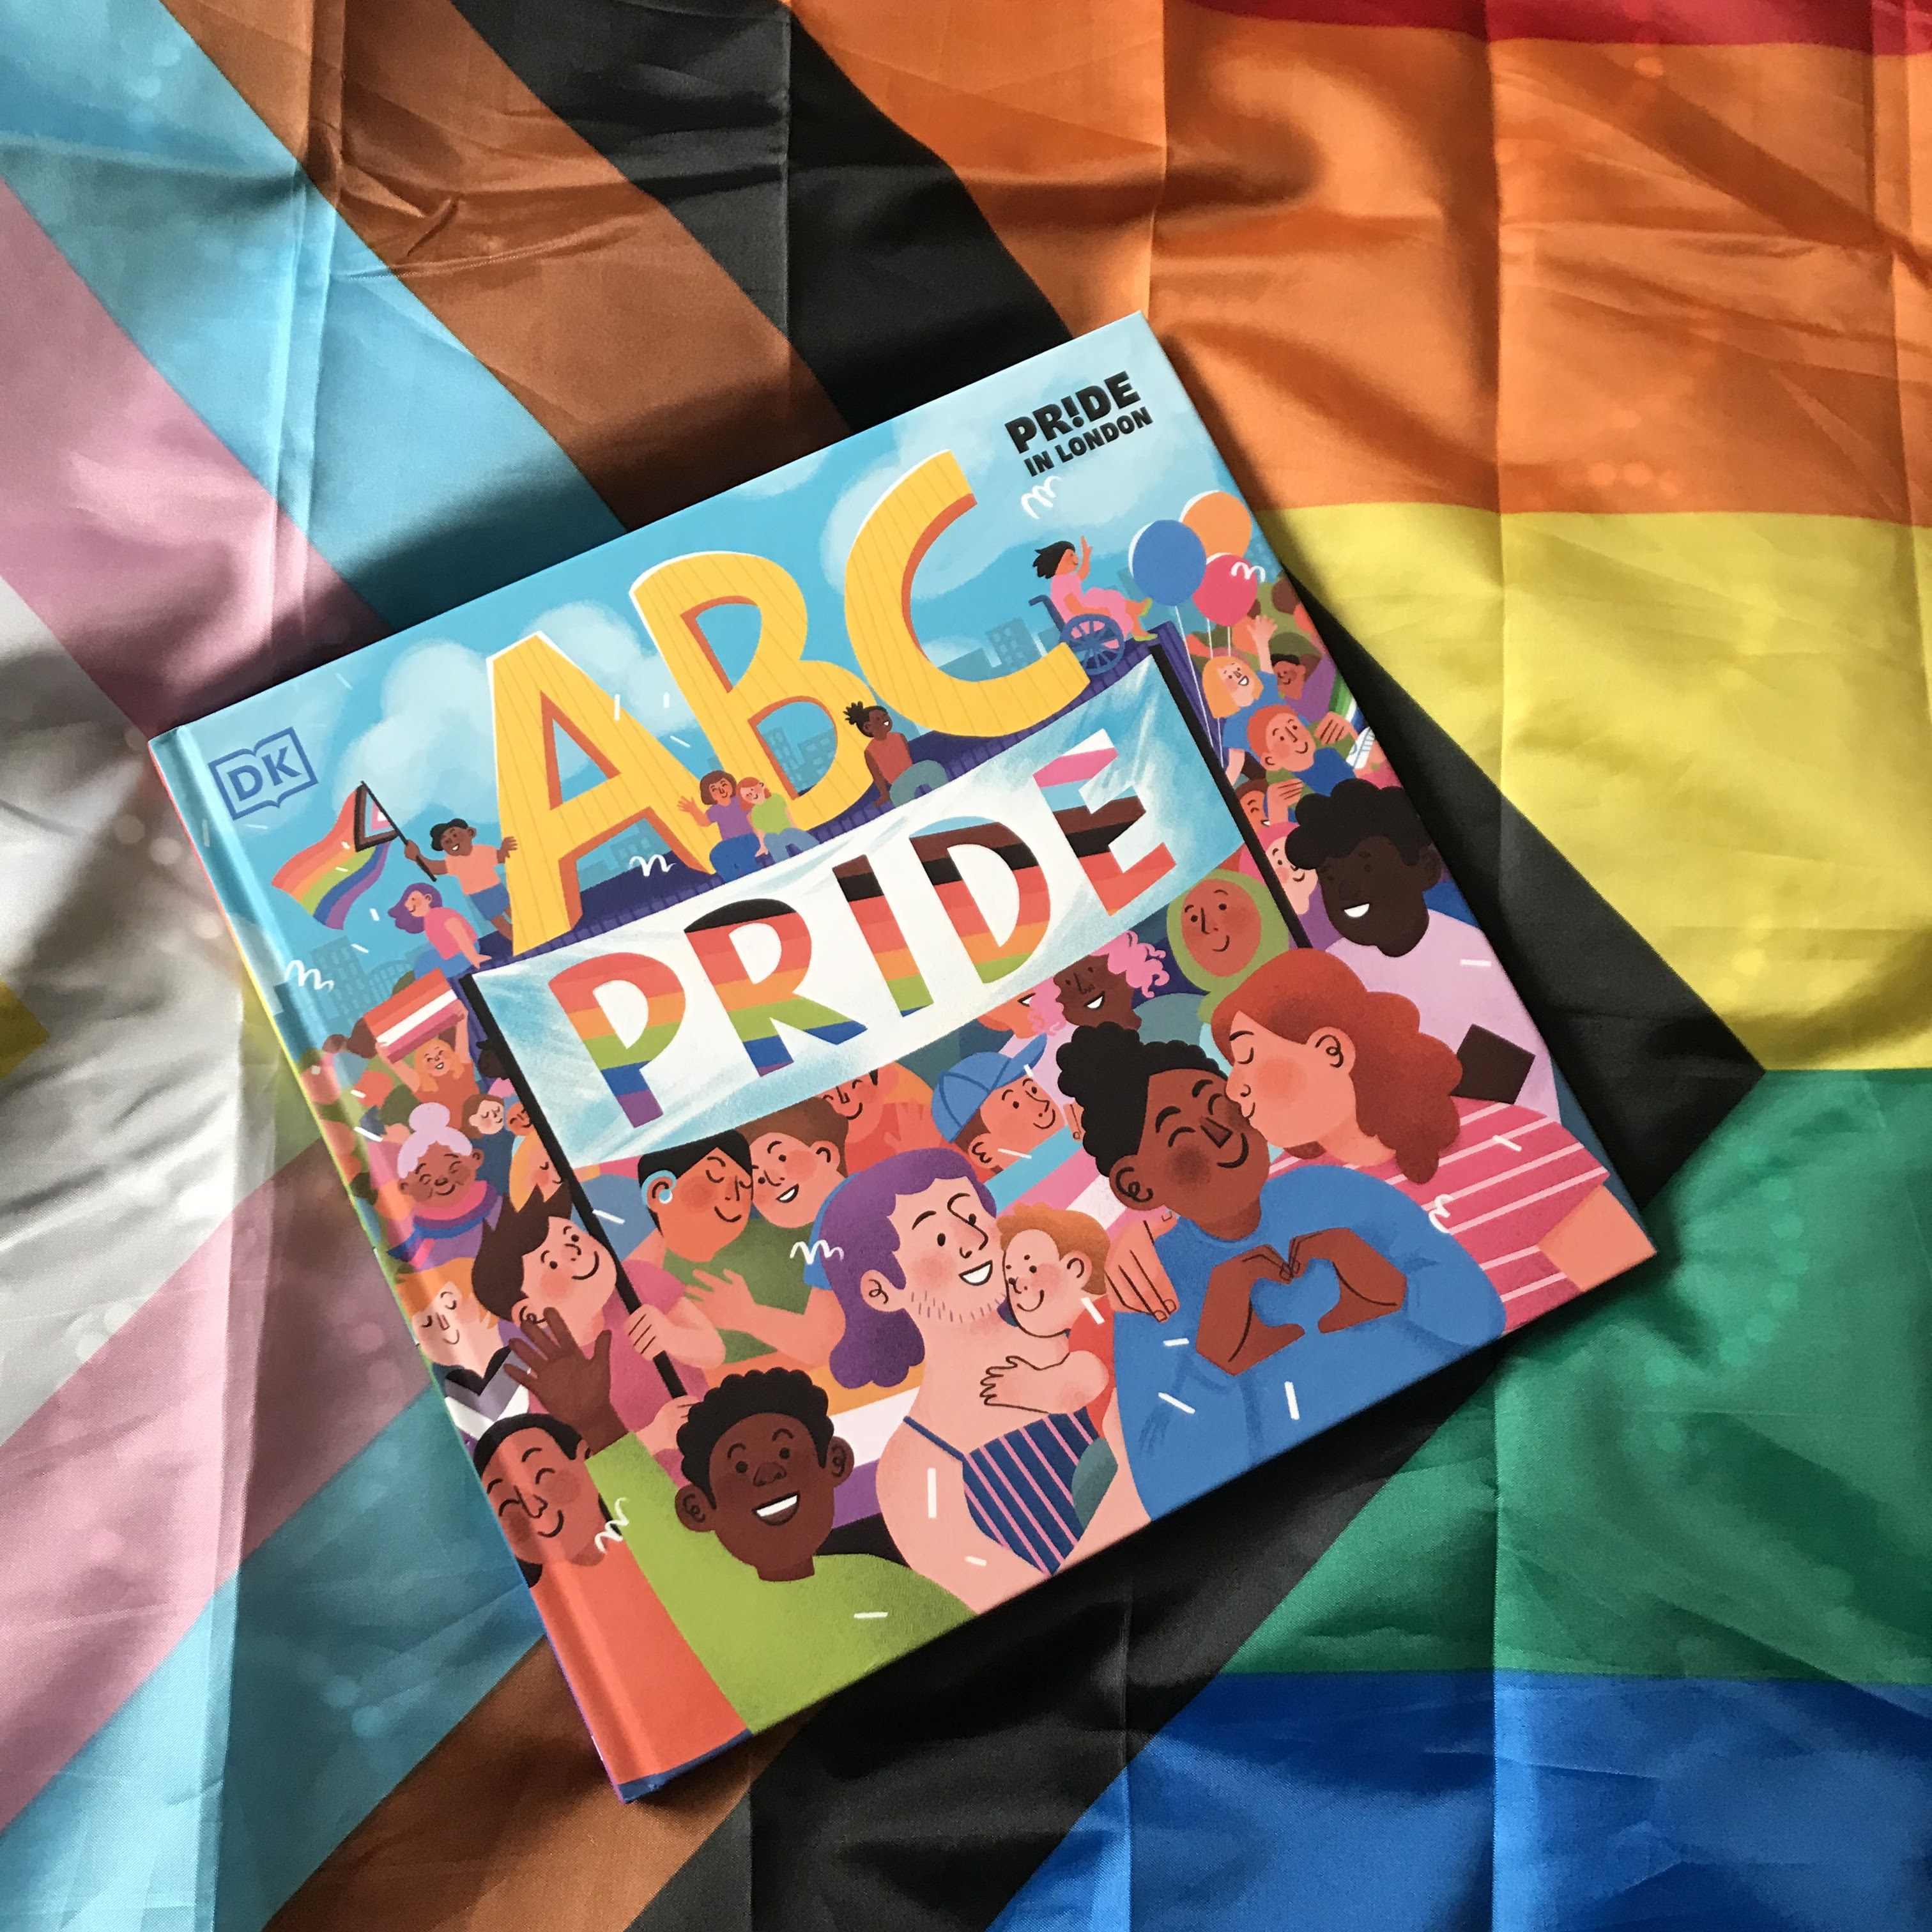 ABC Pride by Dr Elly Barnes MBE, Louie Stowell and Amy Phelps on a Progress Pride flag at a diagonal, top left to bottom right.